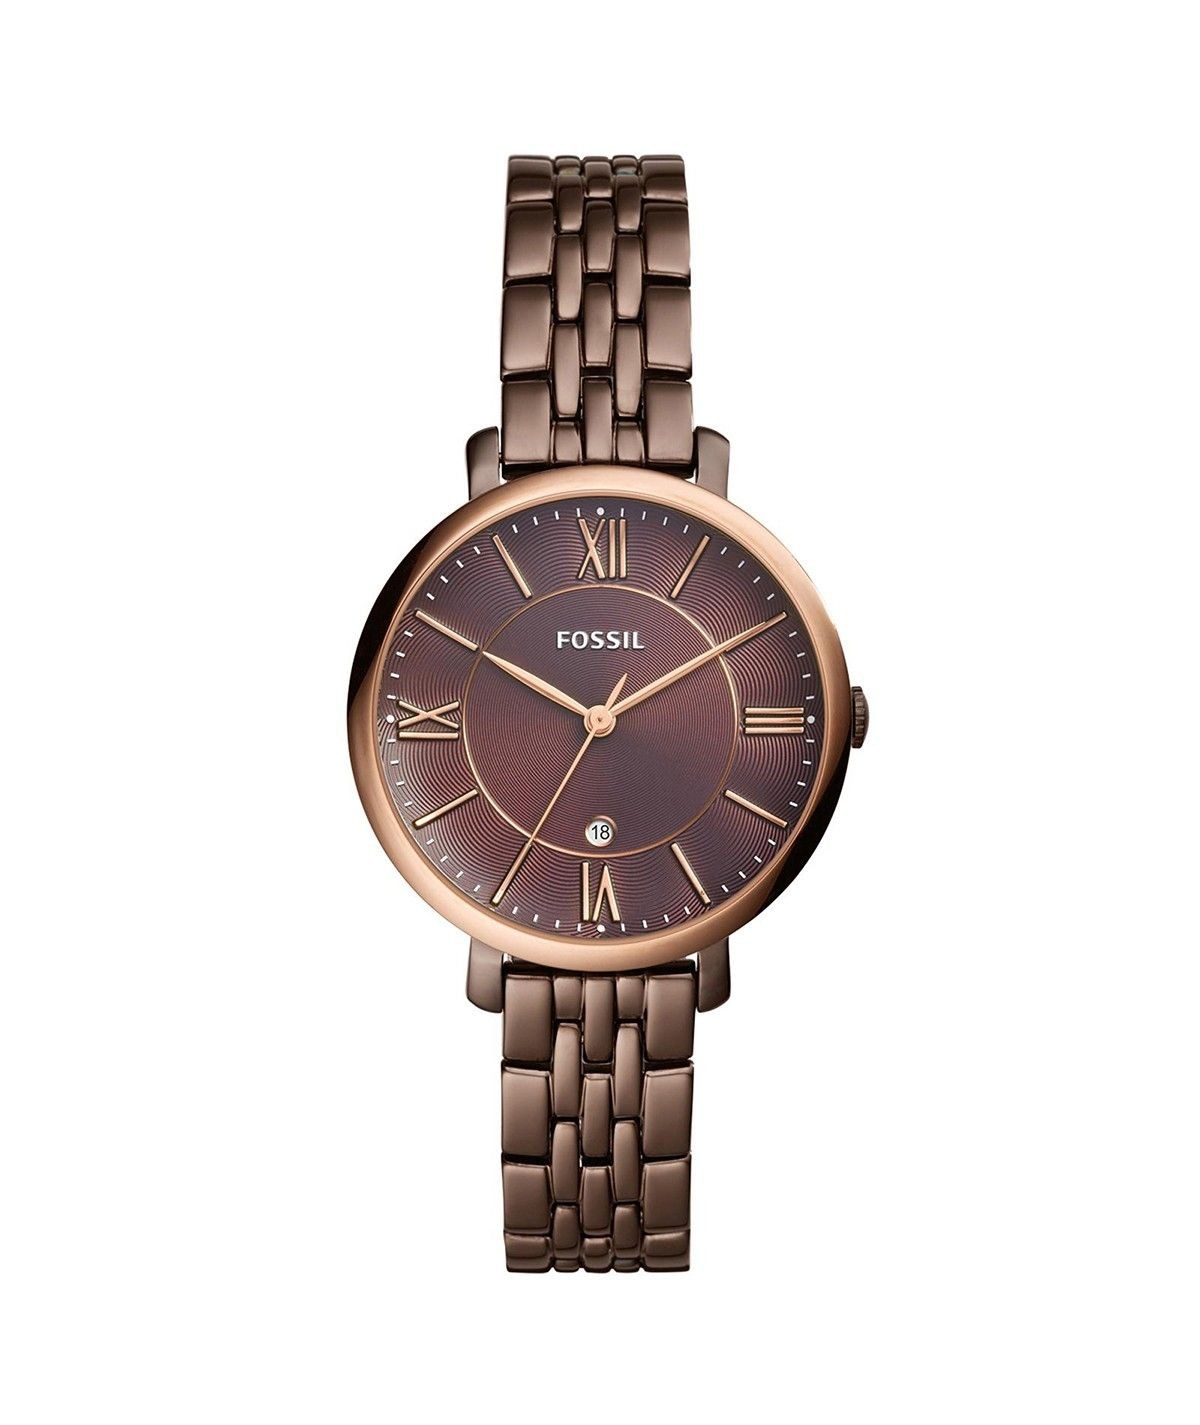 Fossil Jacqueline Brown Dial Brown Steel Strap Watch for Women - ES4275